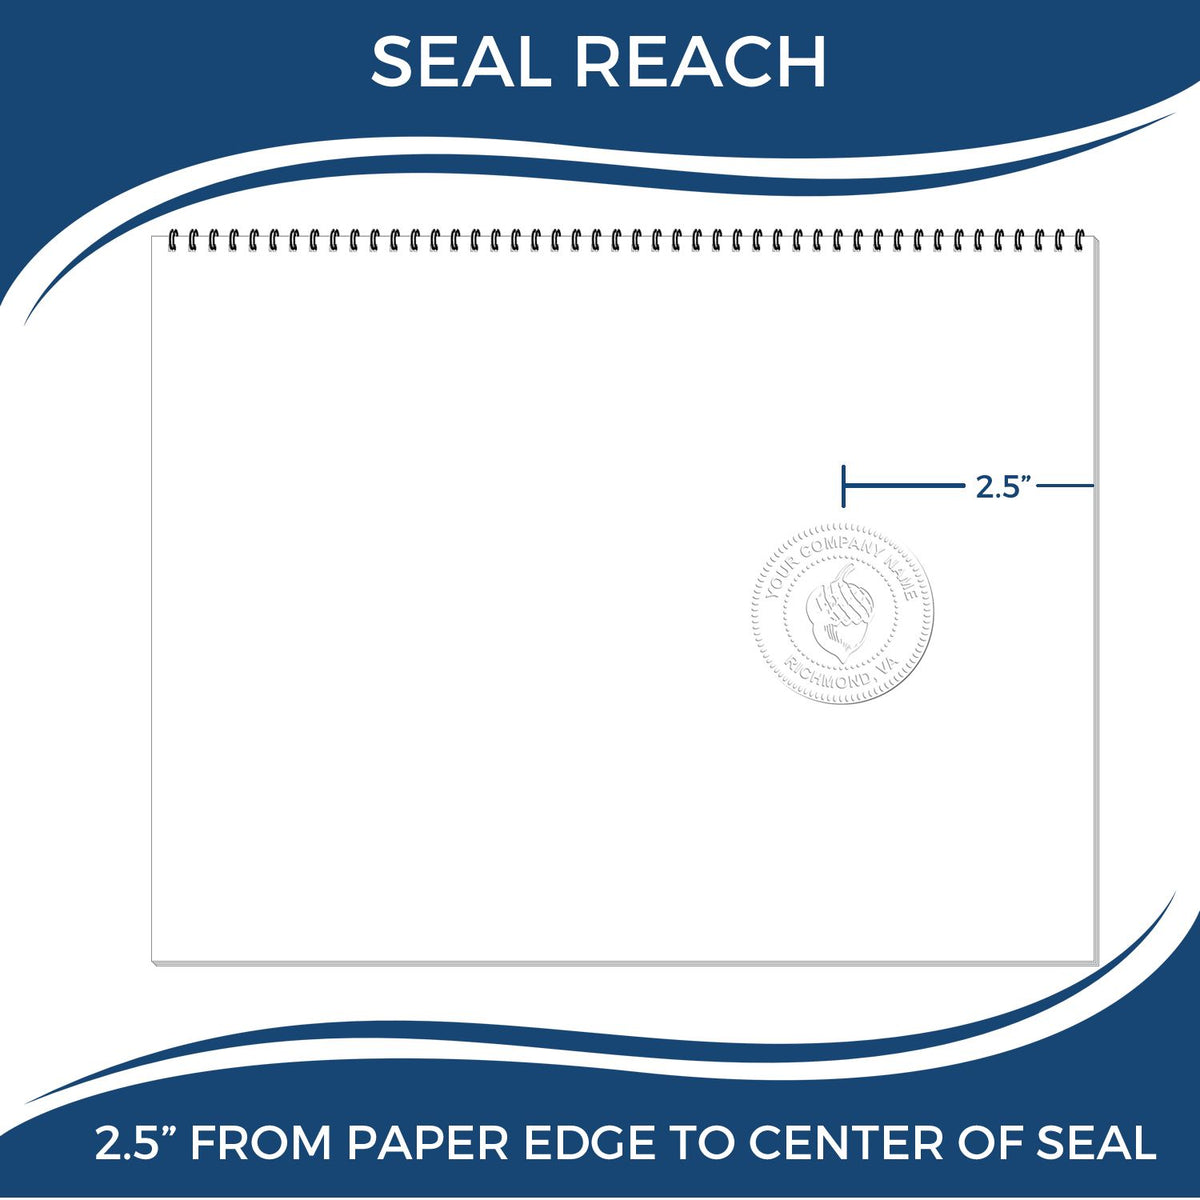 An infographic showing the seal reach which is represented by a ruler and a miniature seal image of the Heavy Duty Cast Iron Virginia Architect Embosser